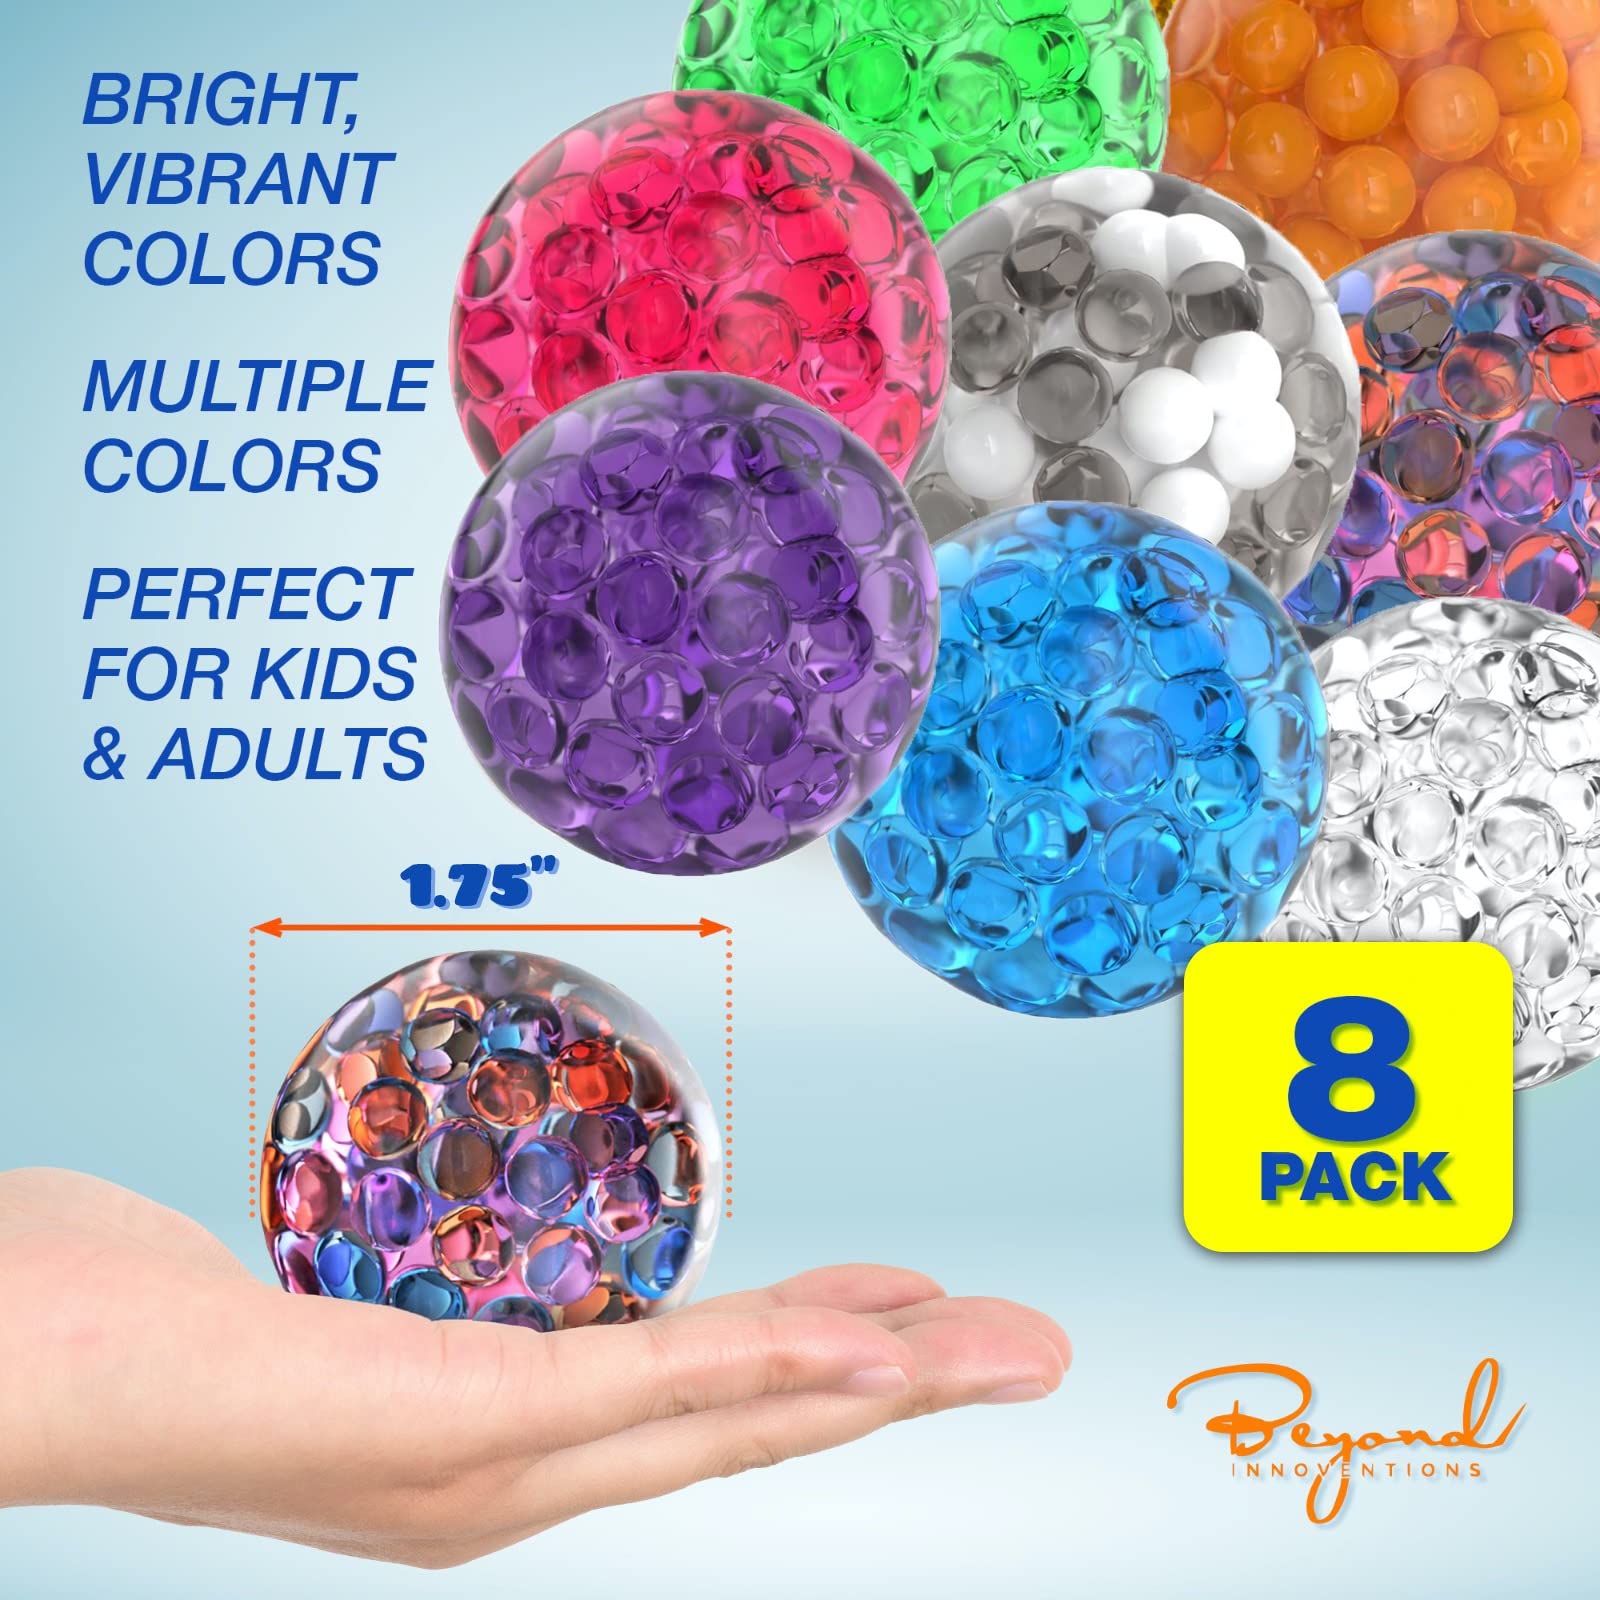 Sticky Balls - Fidget Pack of 8 - Squishy Glow in The Dark Sensory Ball Stress Toys - Sticks to Ceiling and Wall - Stress Relief Gifts, Party Supplies, Anxiety Relief Items for Kids and Adults